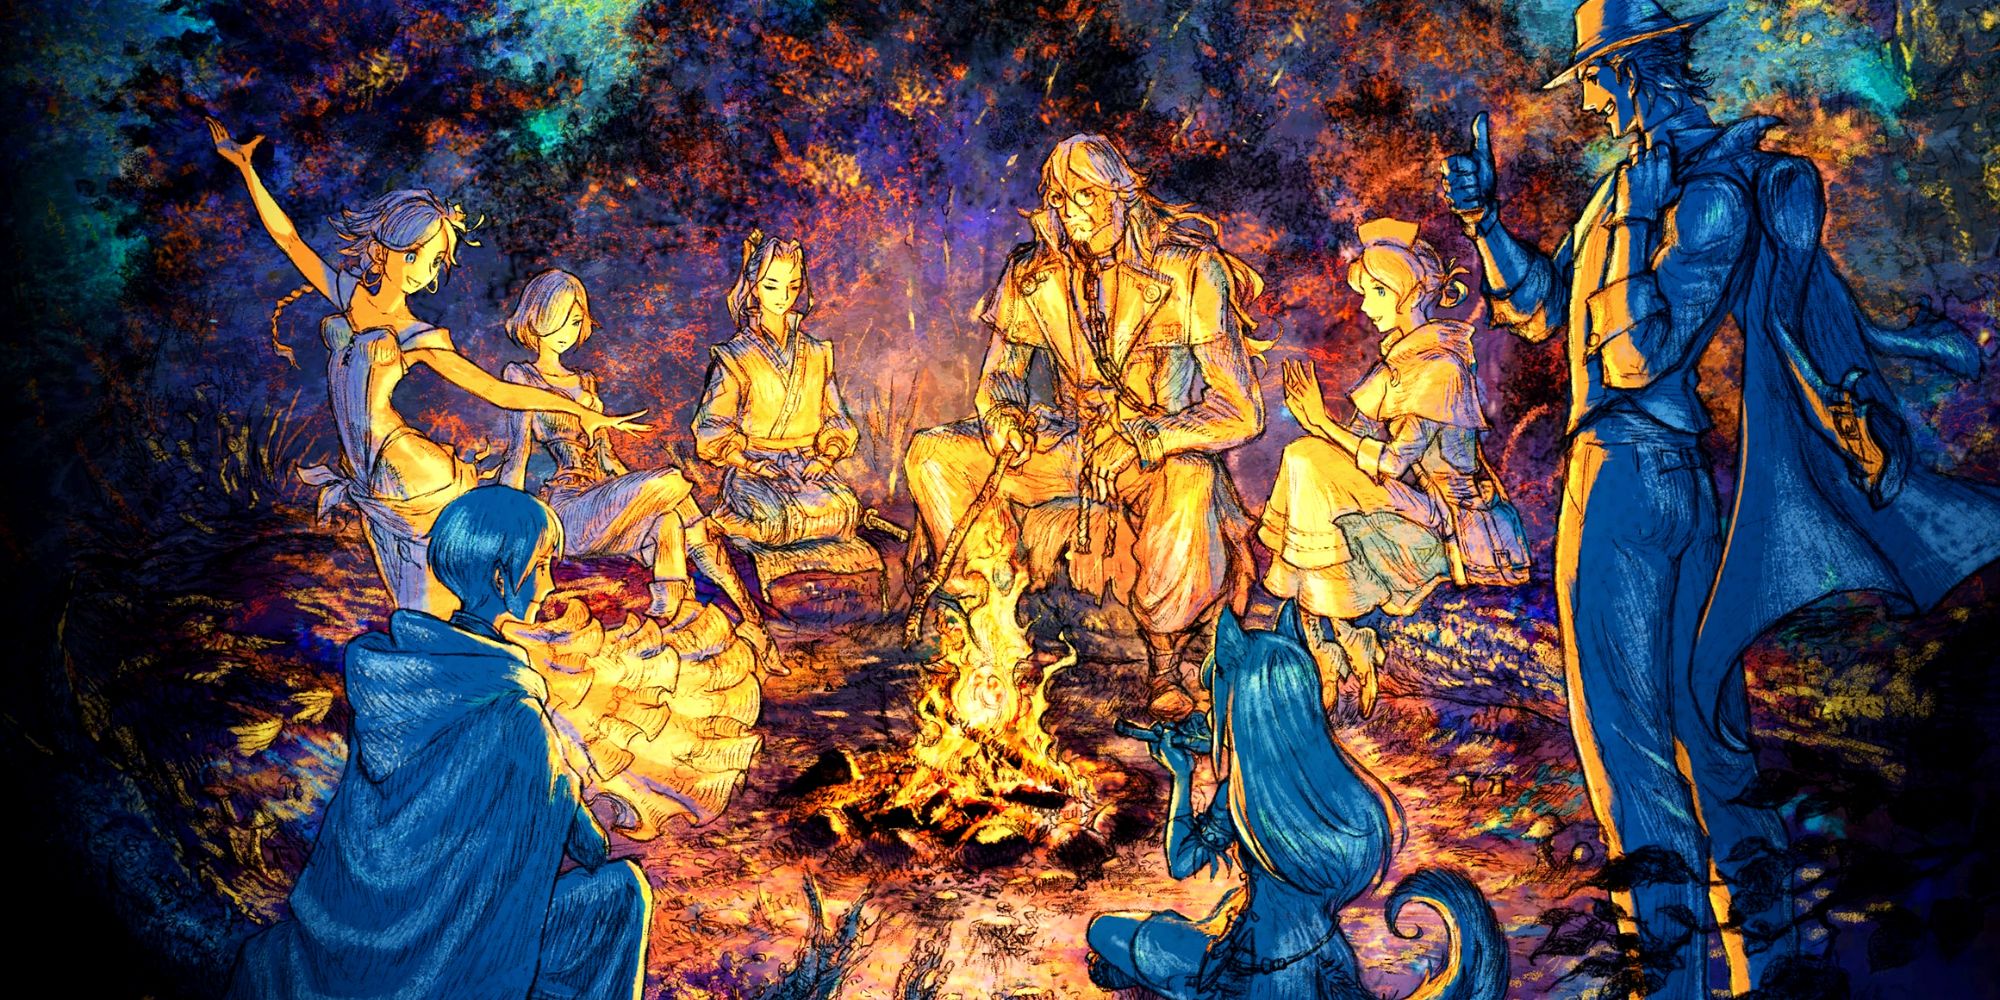 Artwork showing the eight Octopath Traveler 2 characters around a campfire.